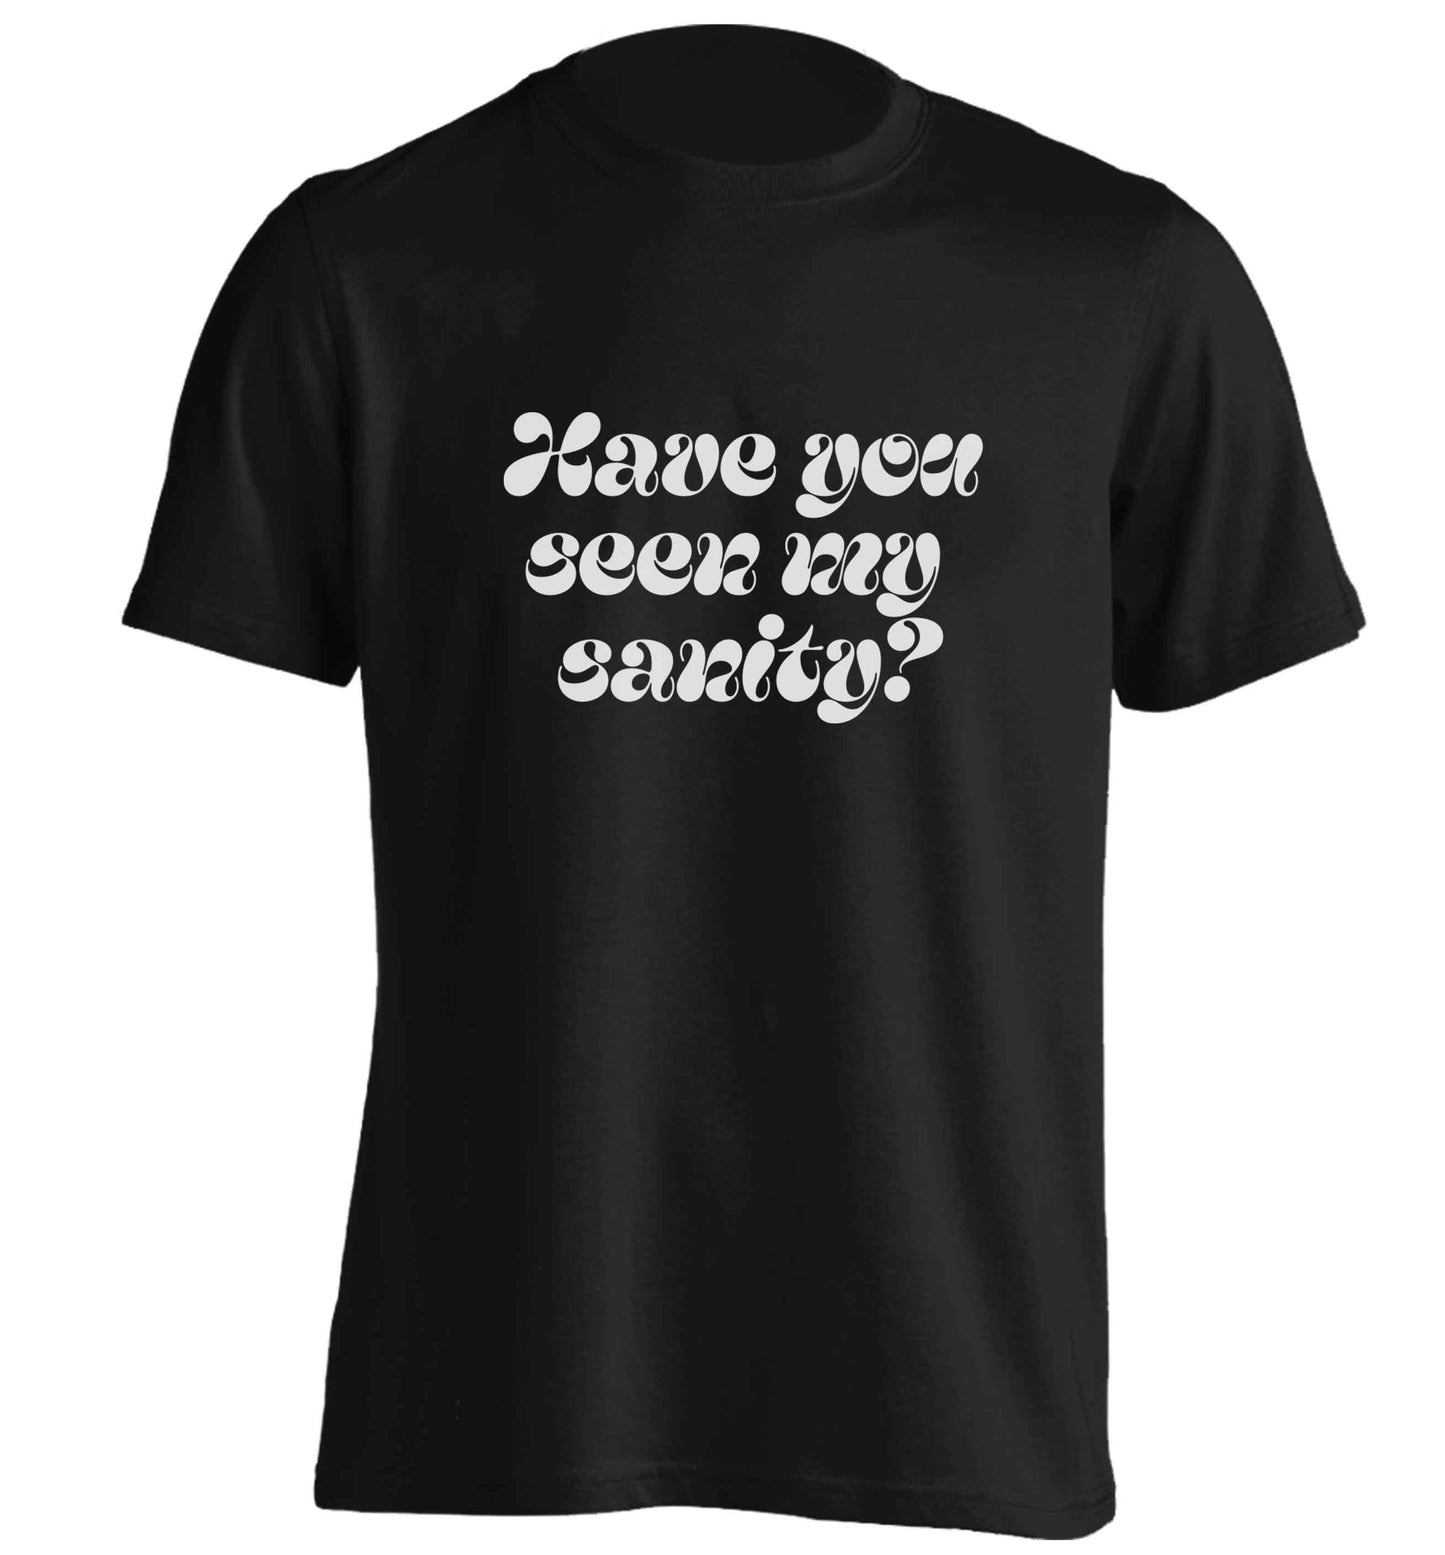 Have you seen my sanity? adults unisex black Tshirt 2XL